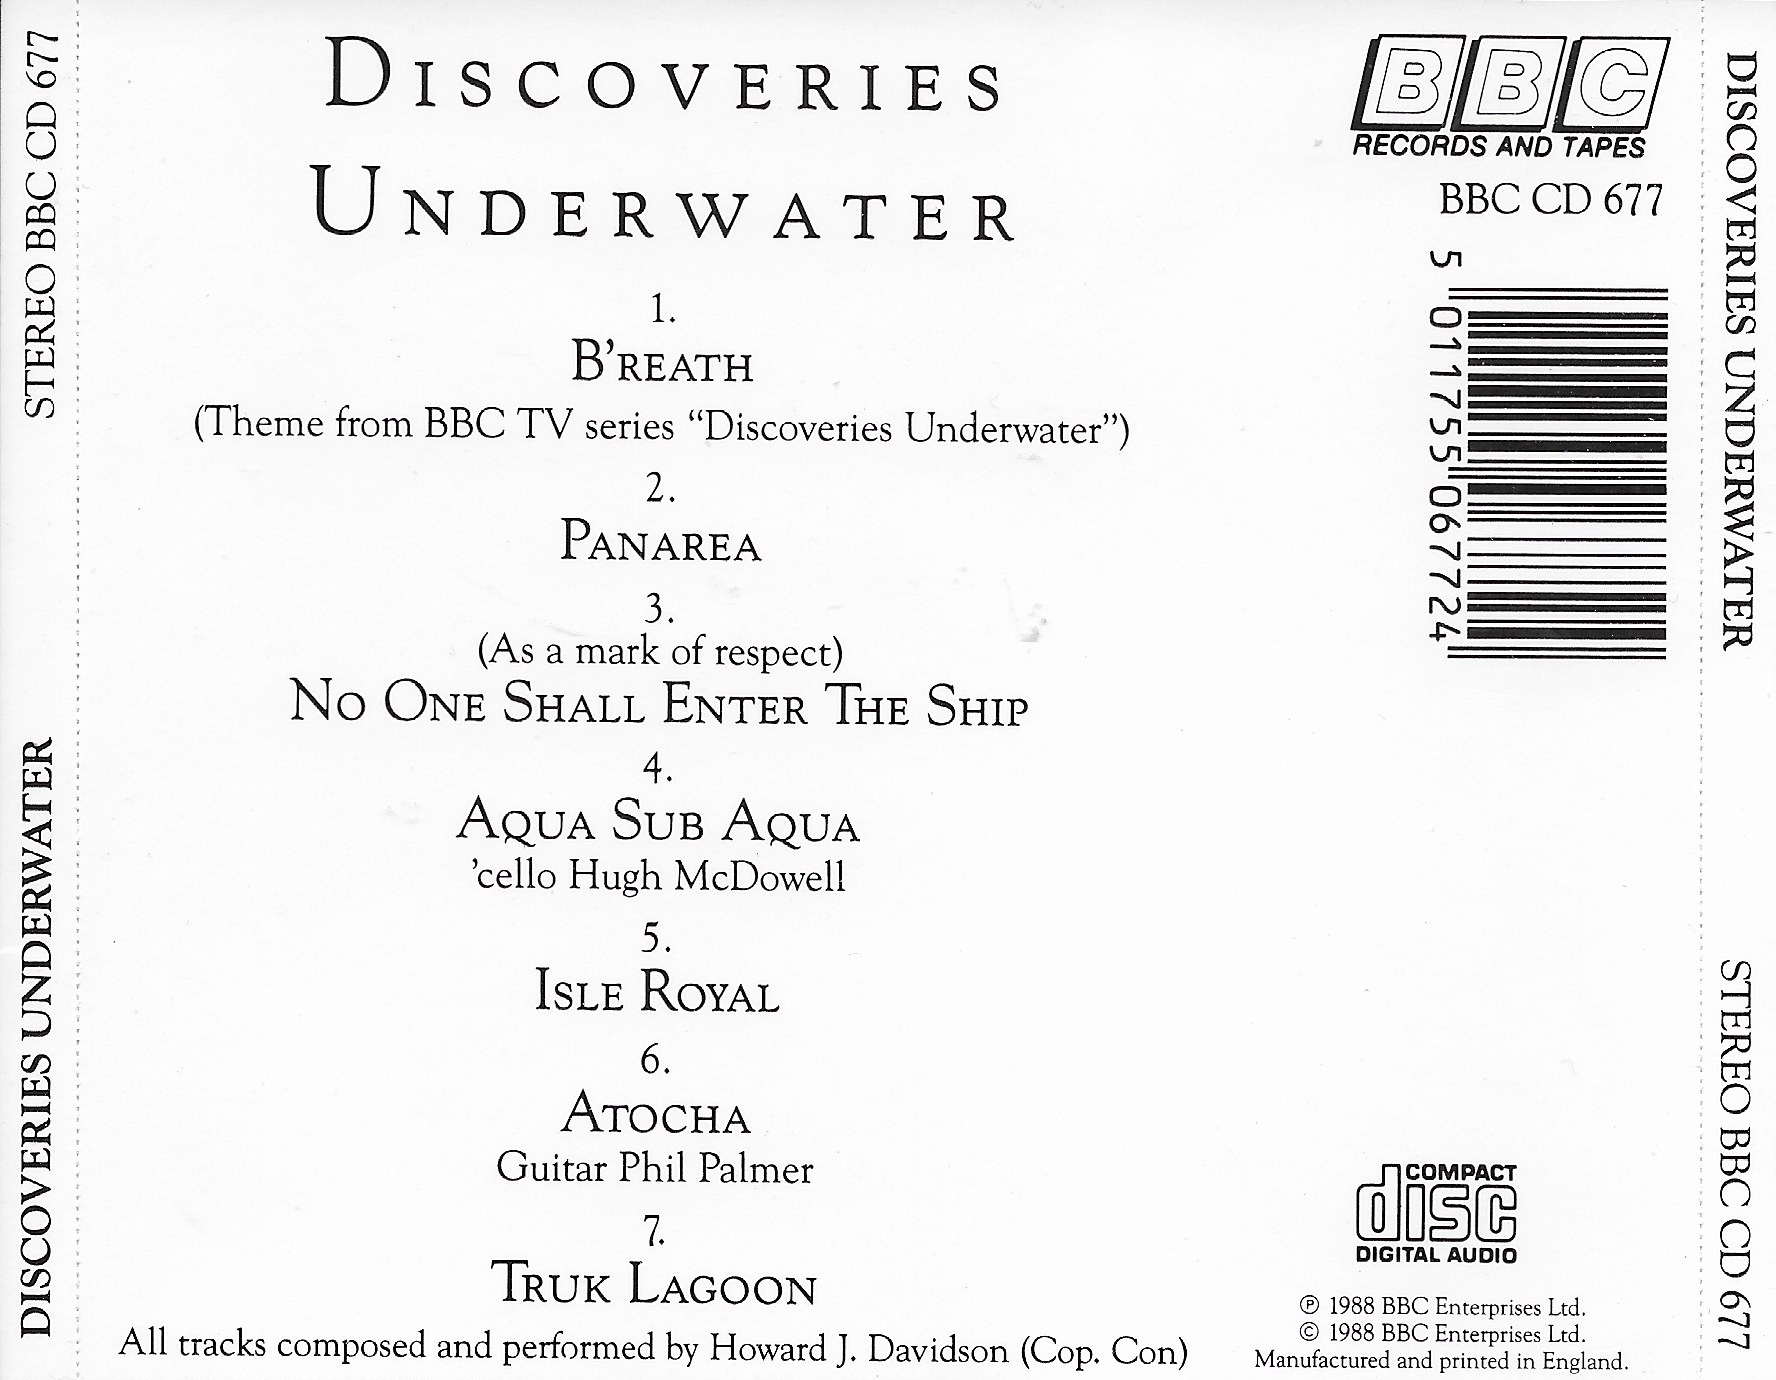 Back cover of BBCCD677